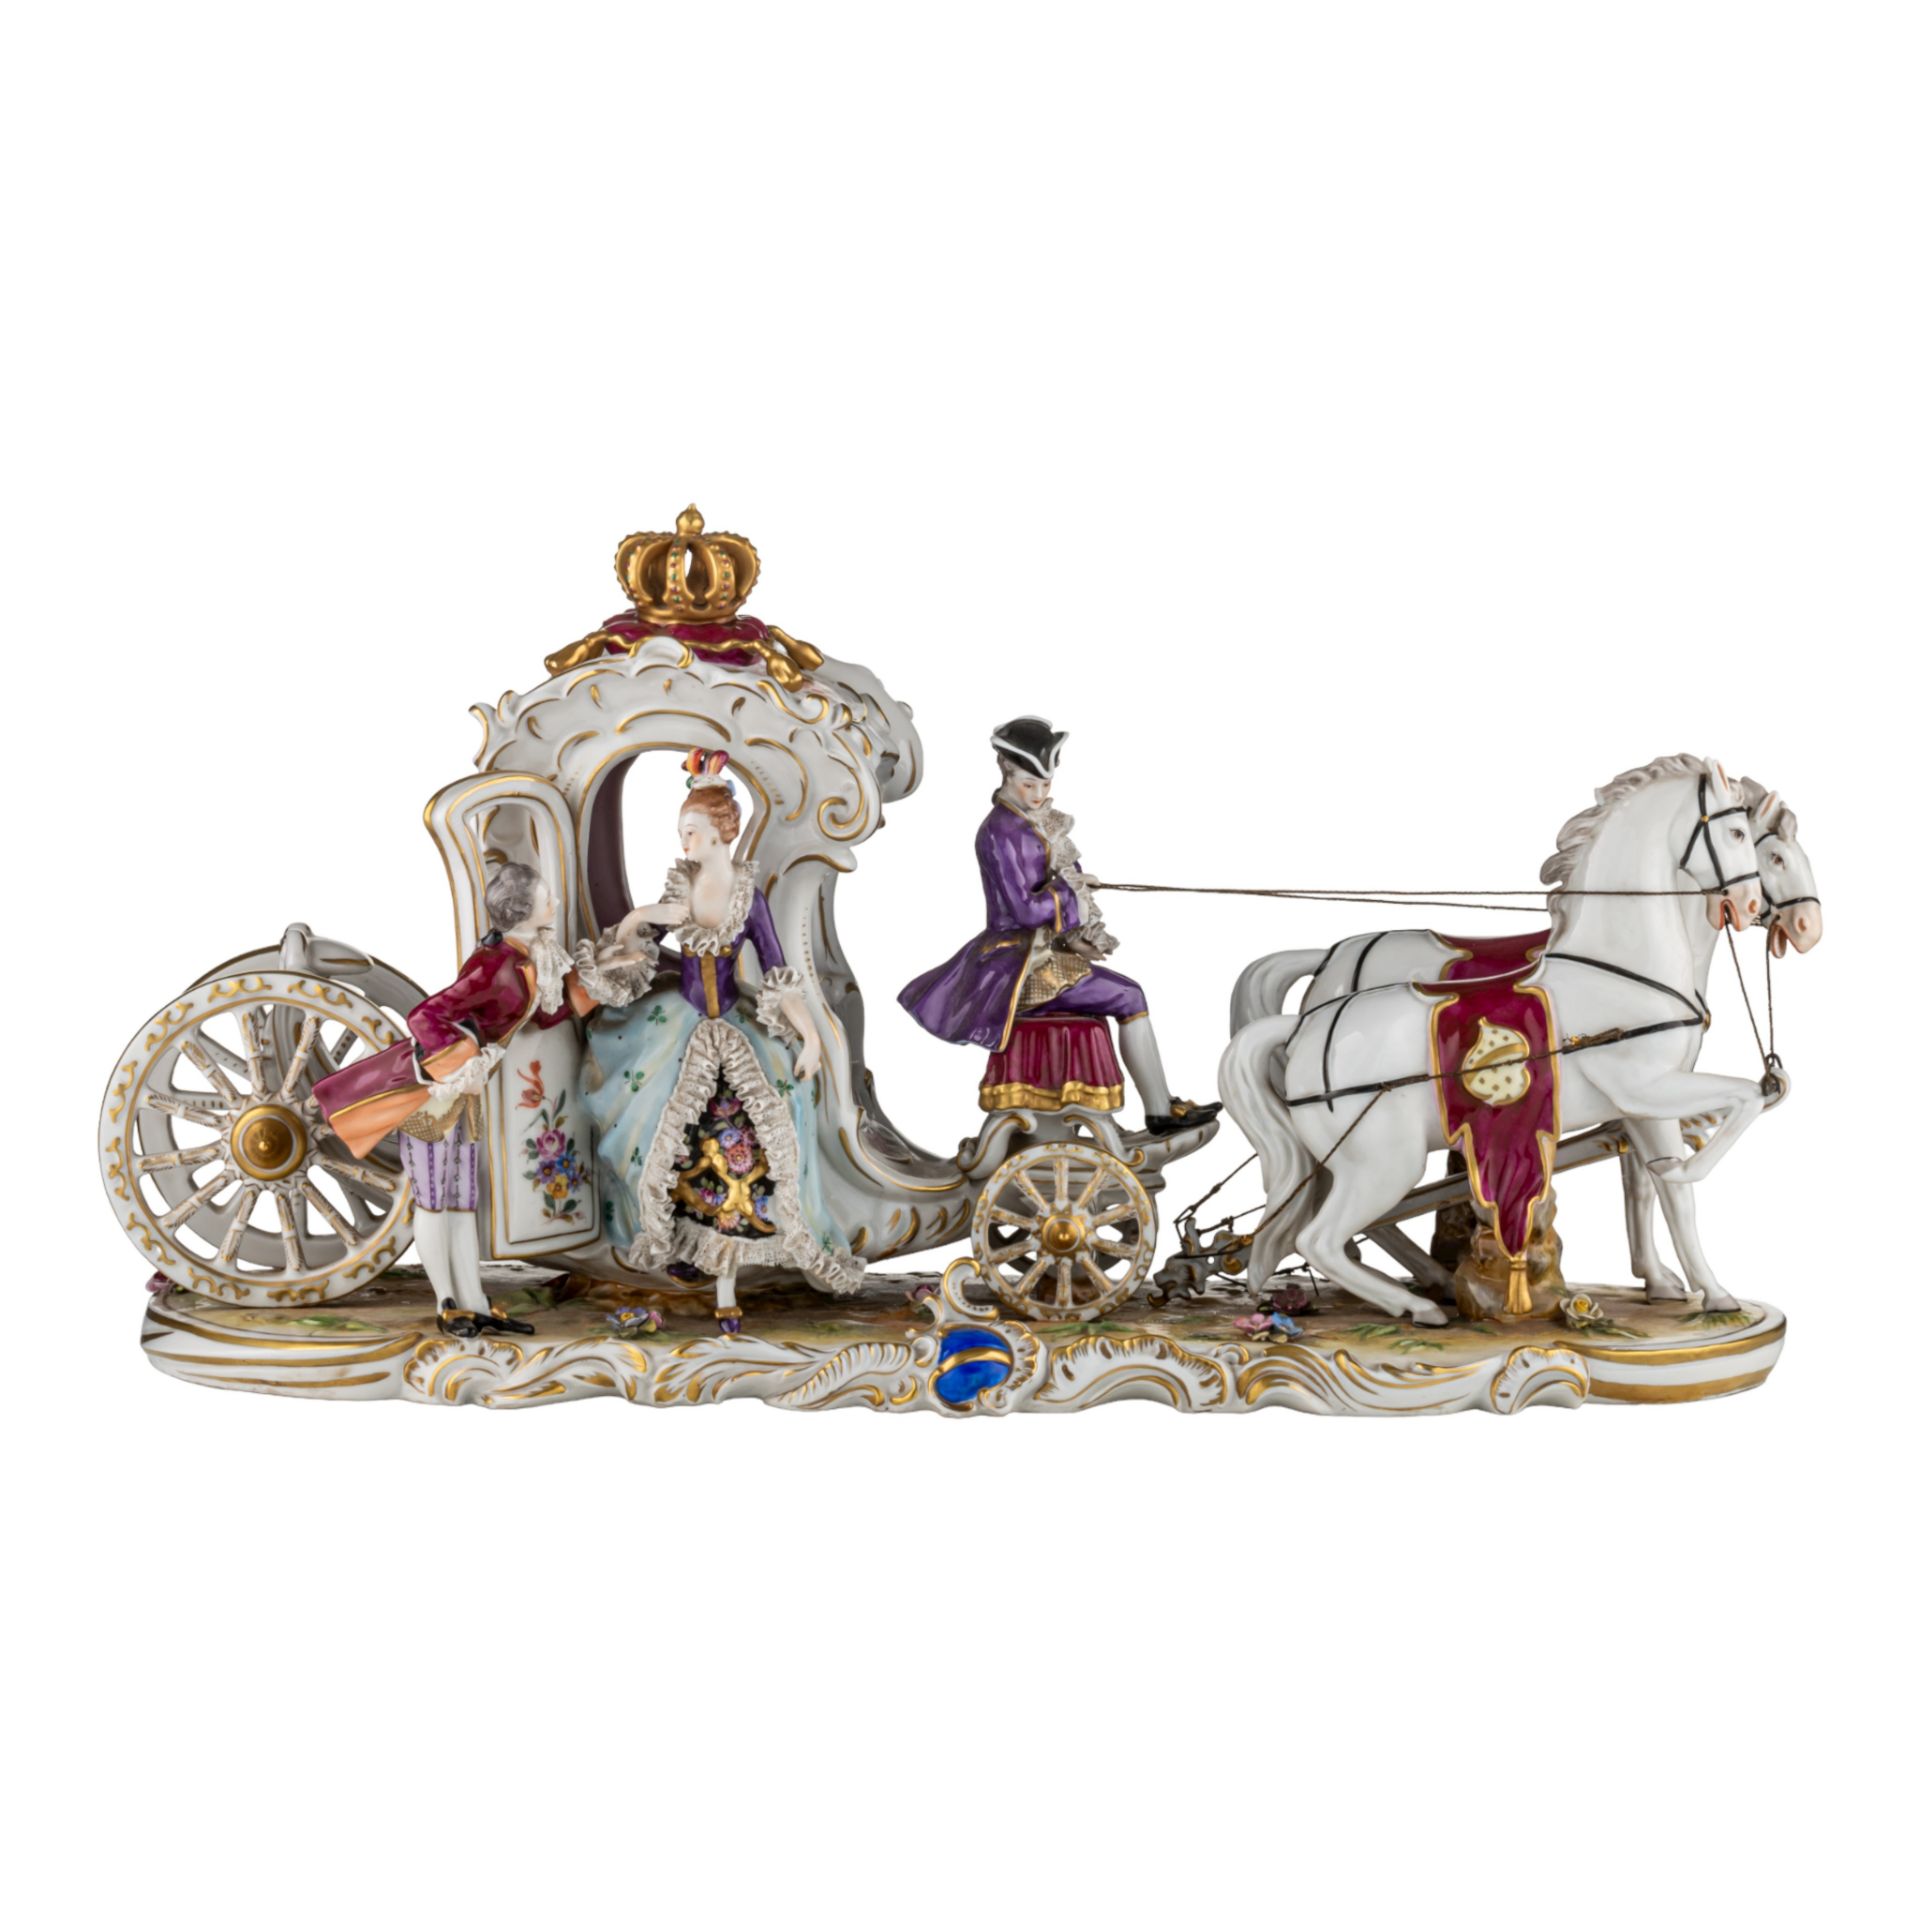 A Saxony porcelain group of a chariot in abundant Rococo style, H 29 - W 57 cm